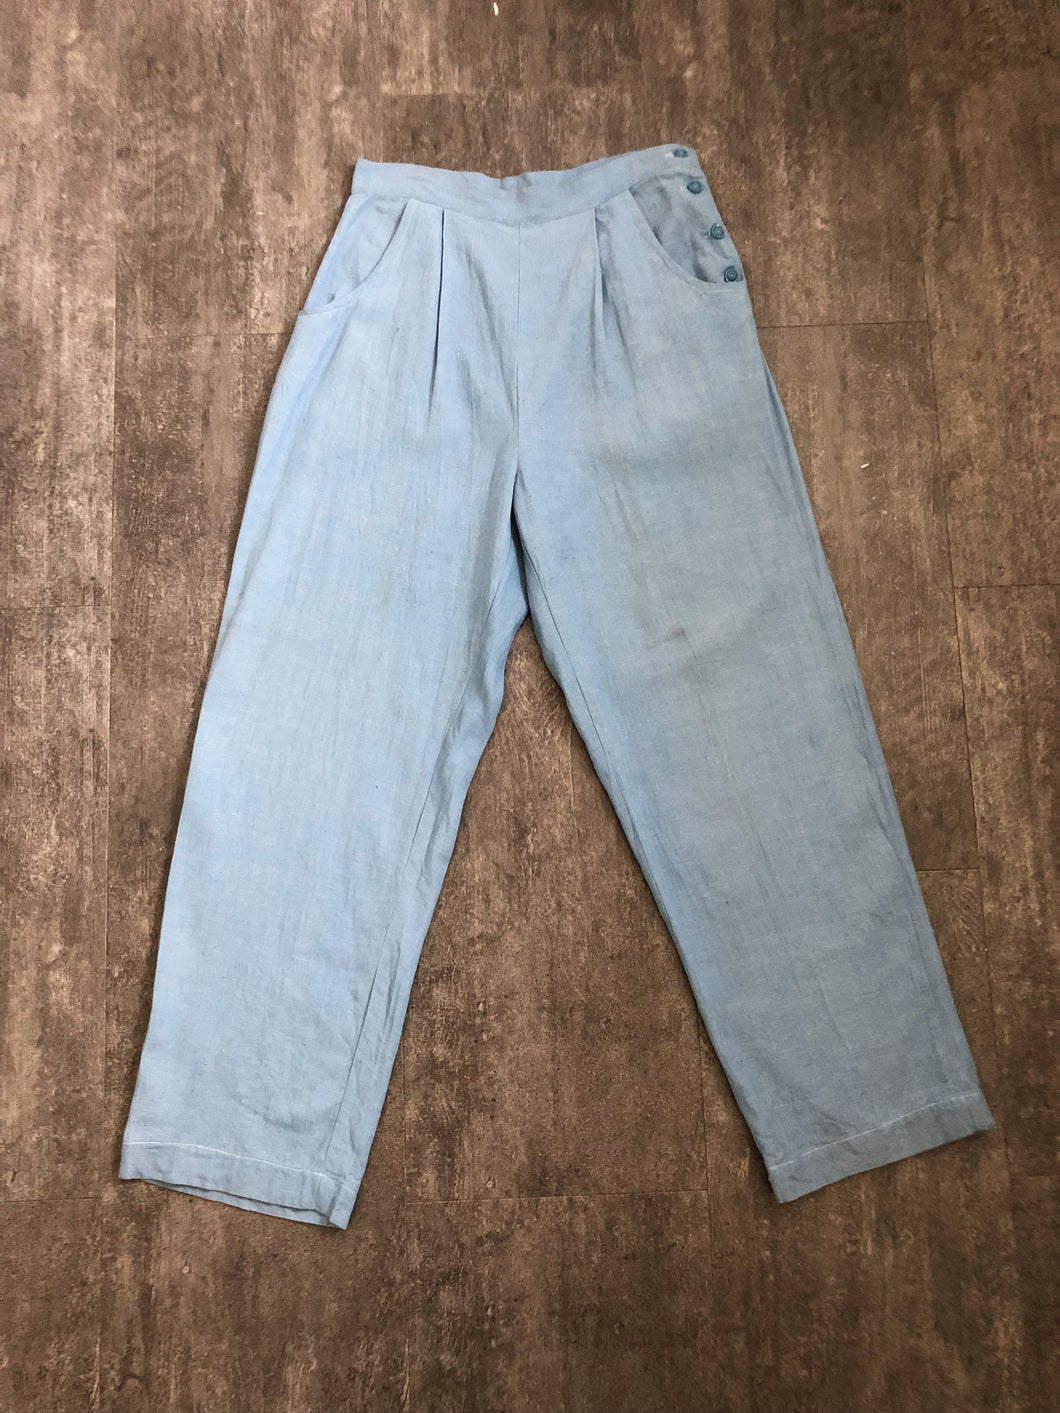 1940s chambray pants . vintage 40s trousers . size large